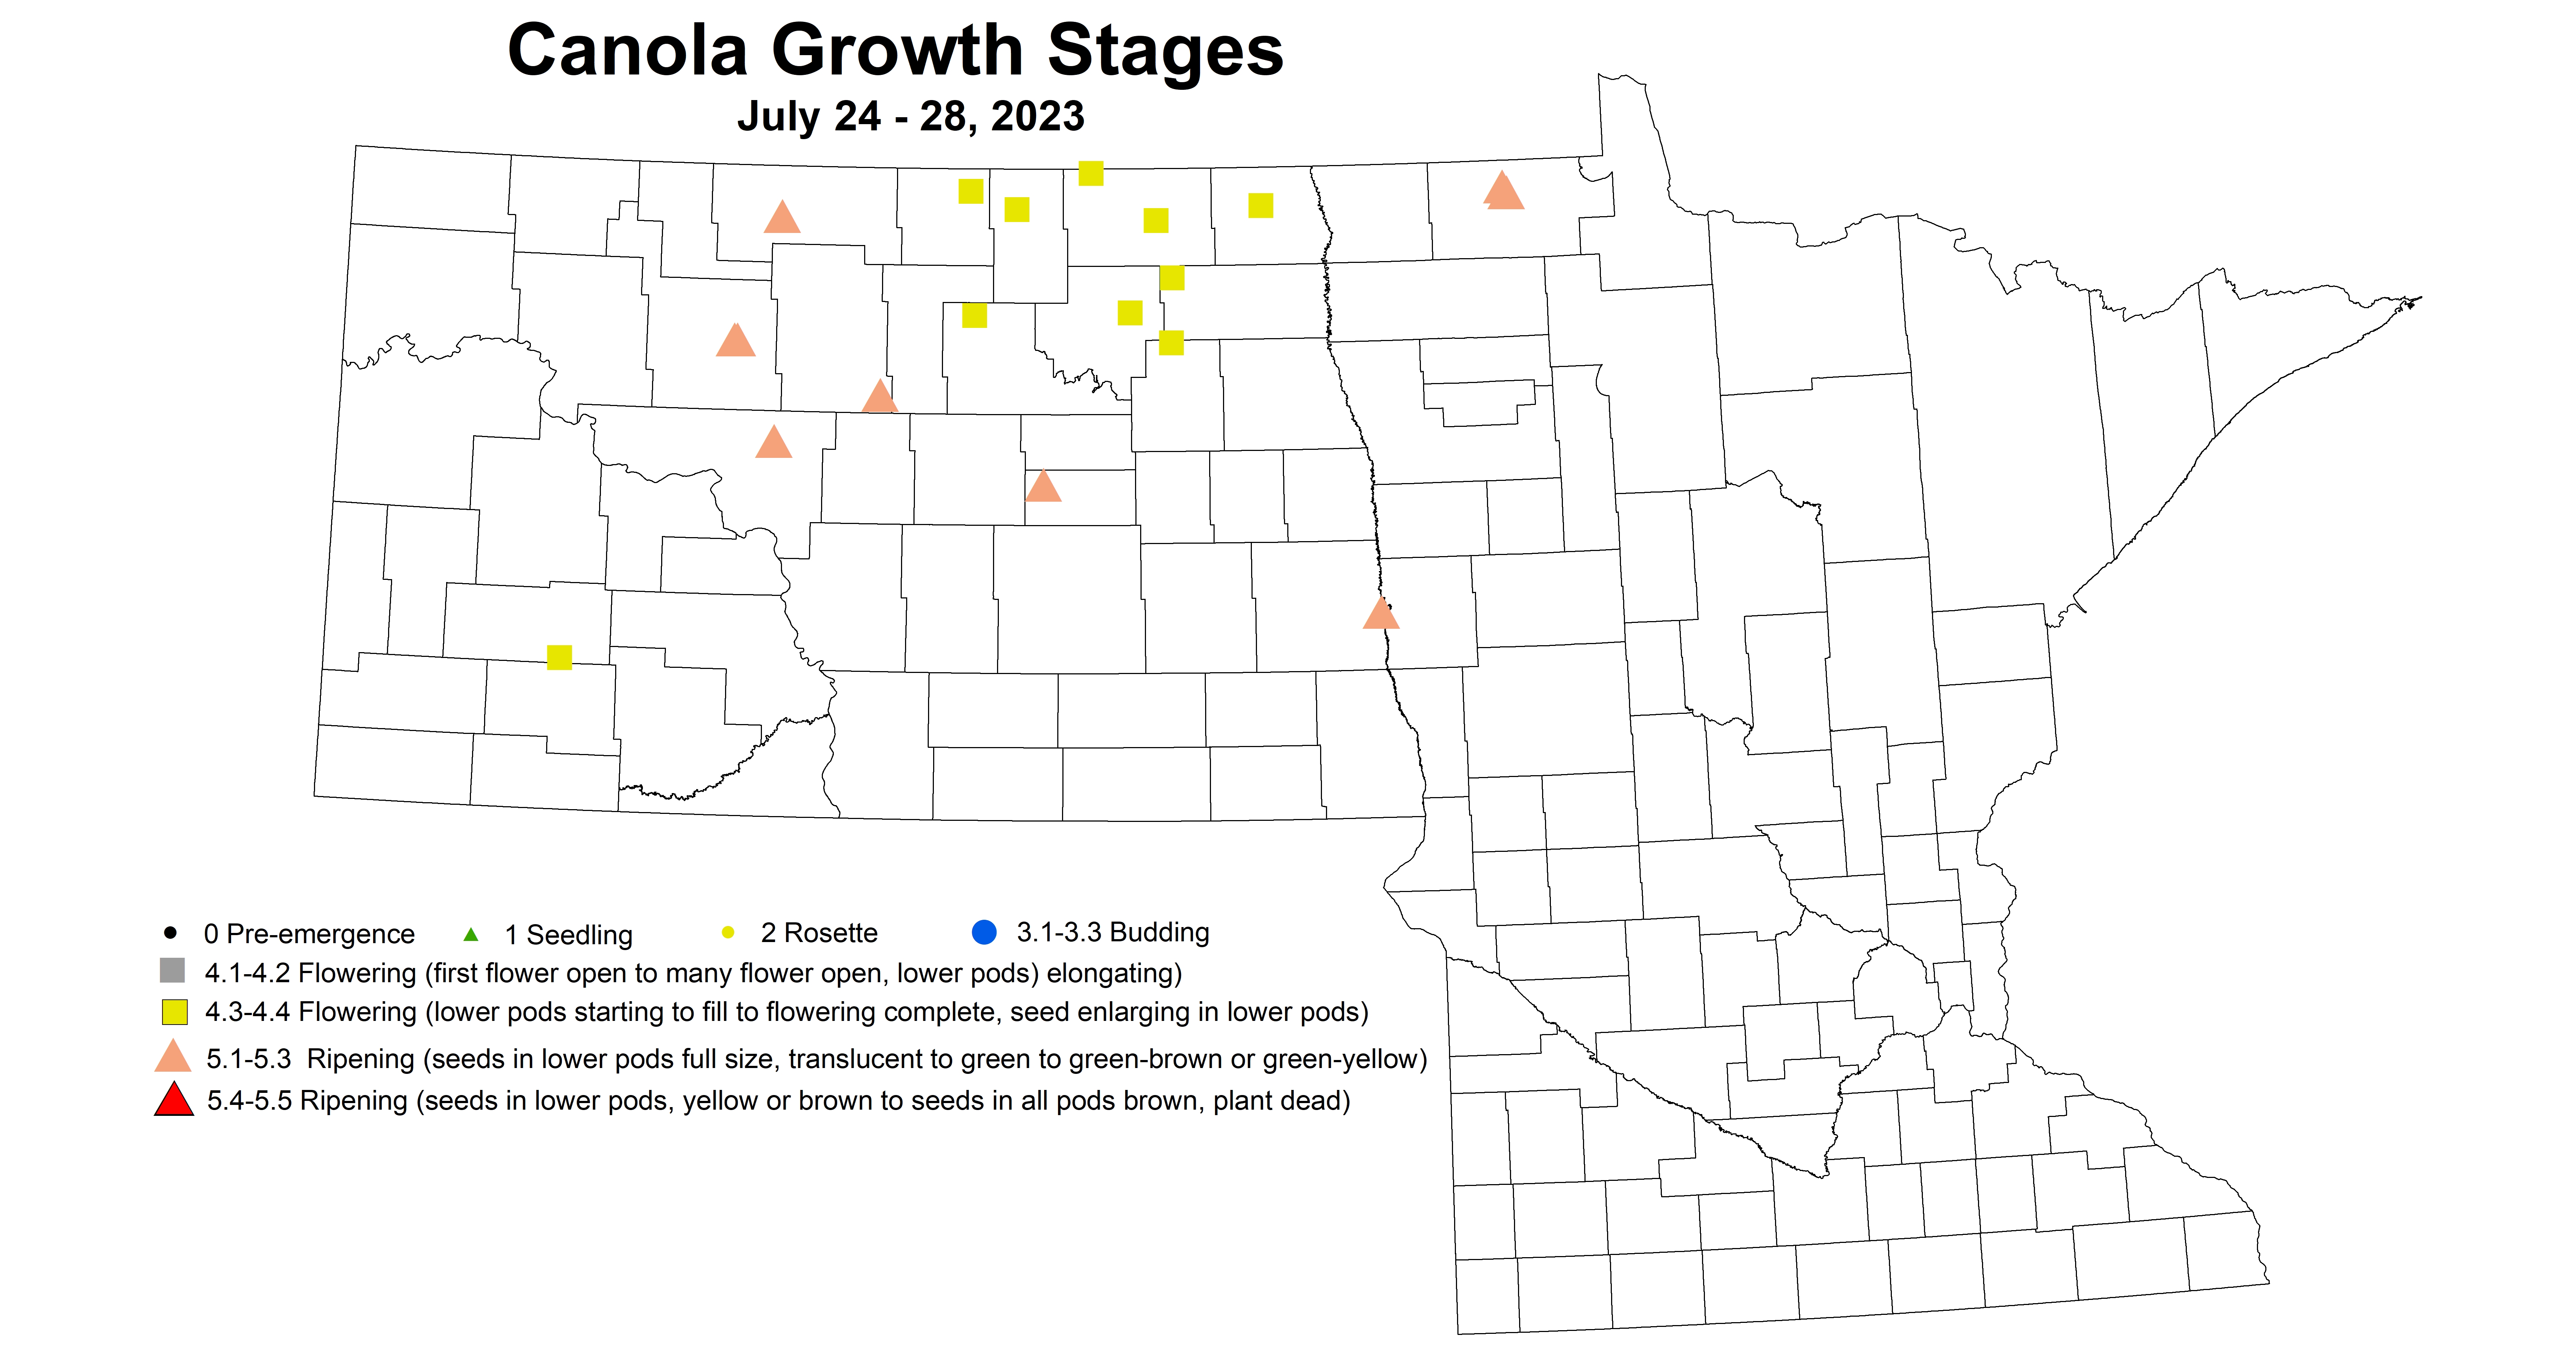 canola growth stages July 24-28 2023